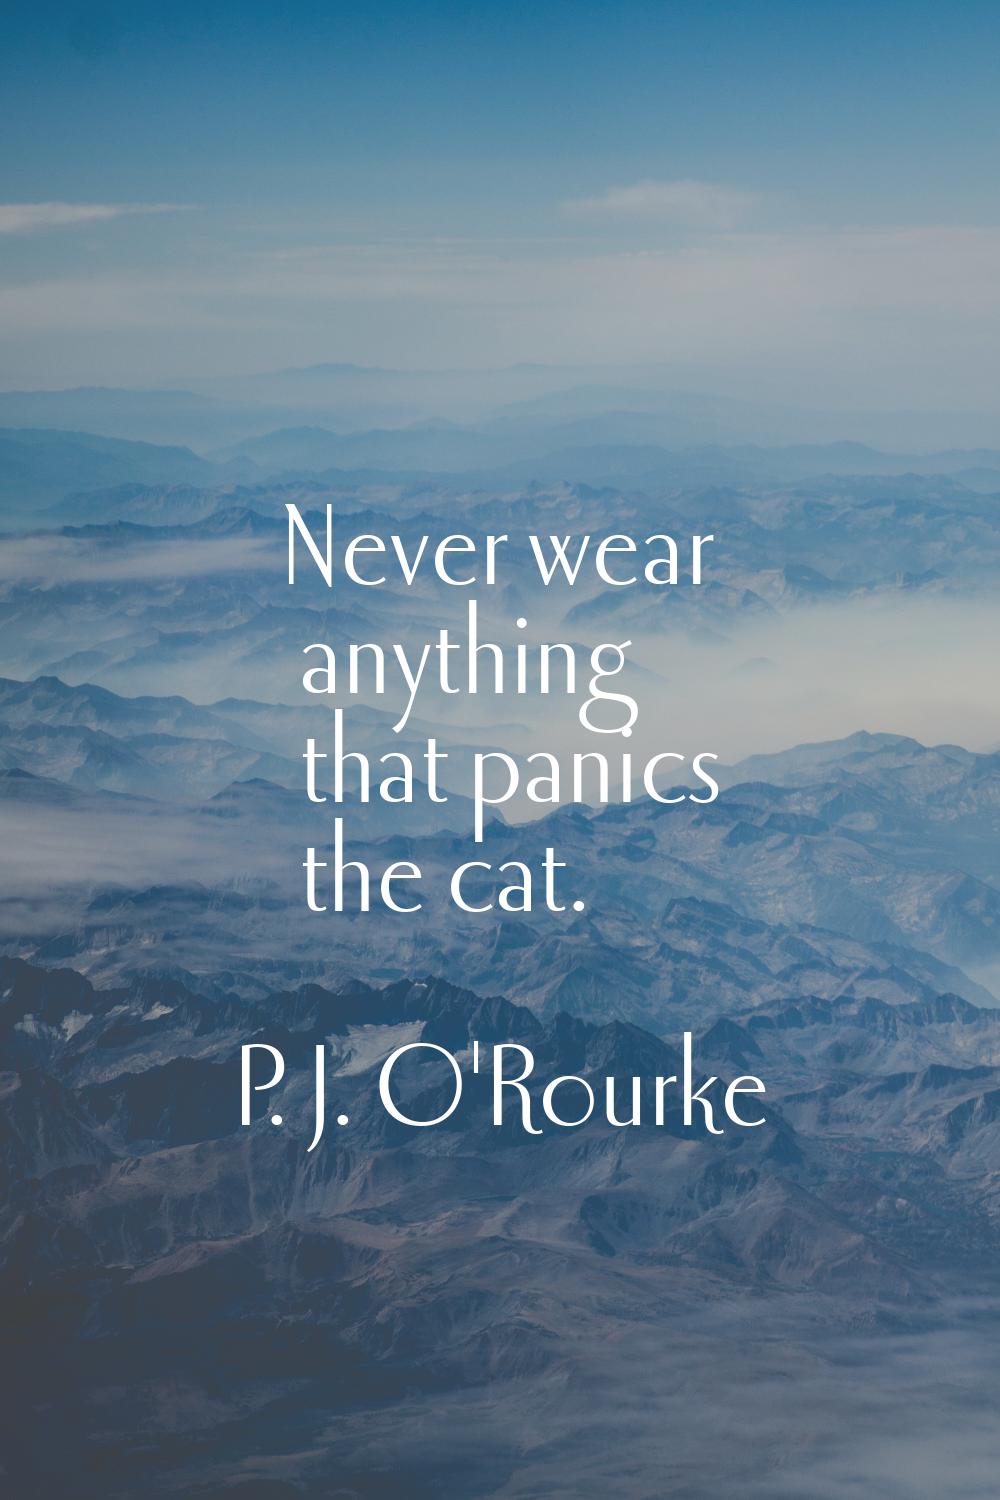 Never wear anything that panics the cat.